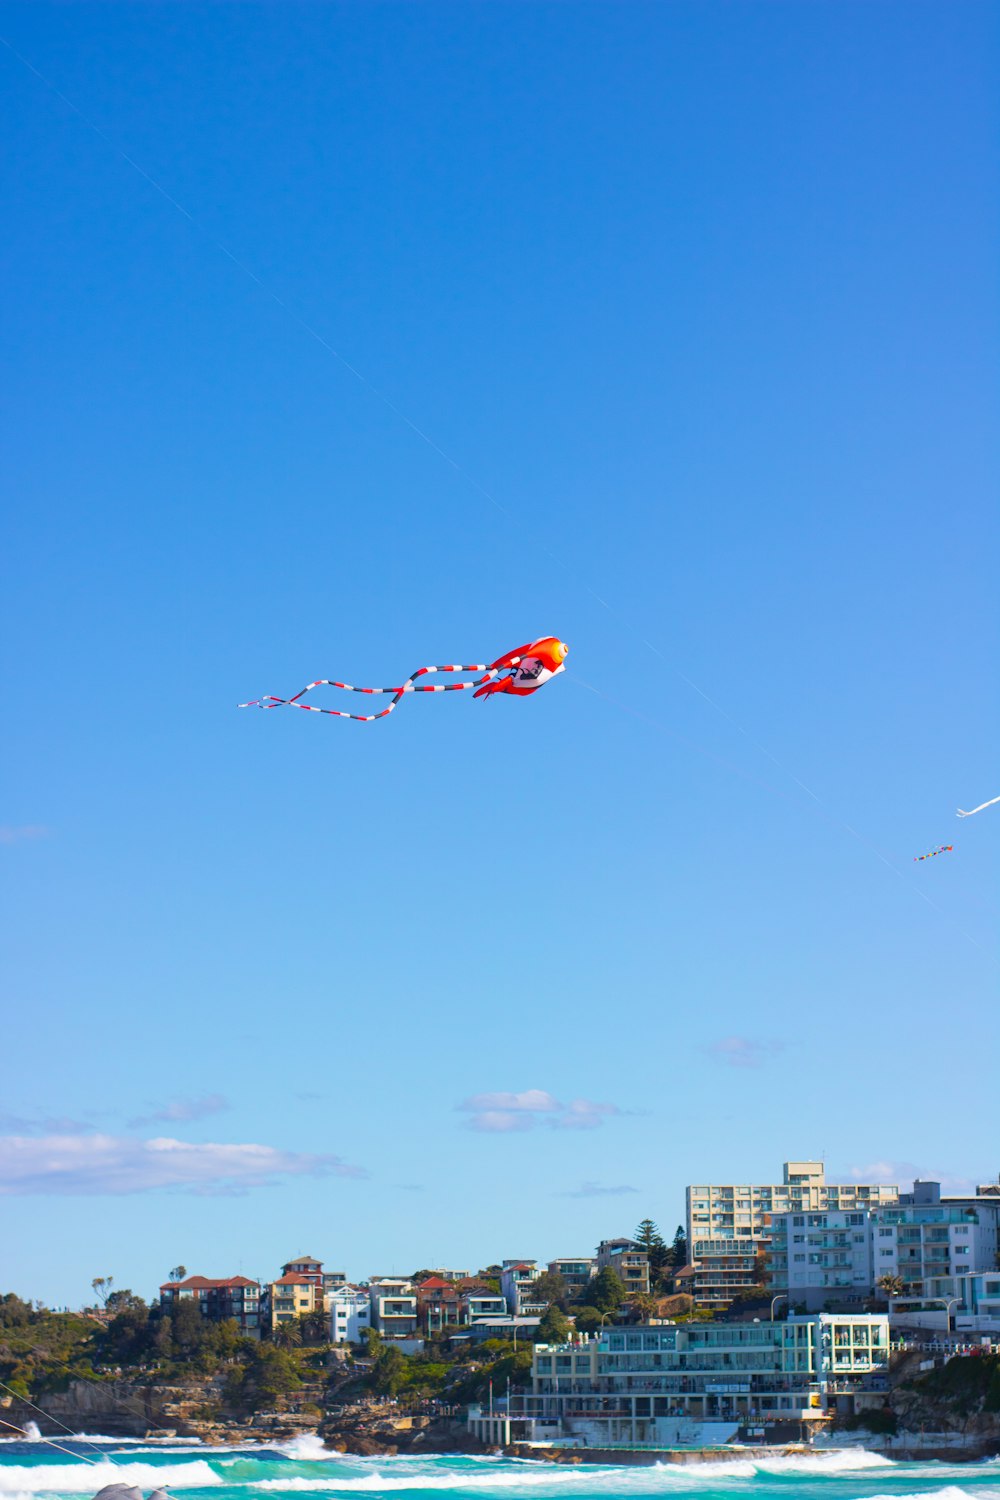 orange and yellow kite flying over city buildings during daytime